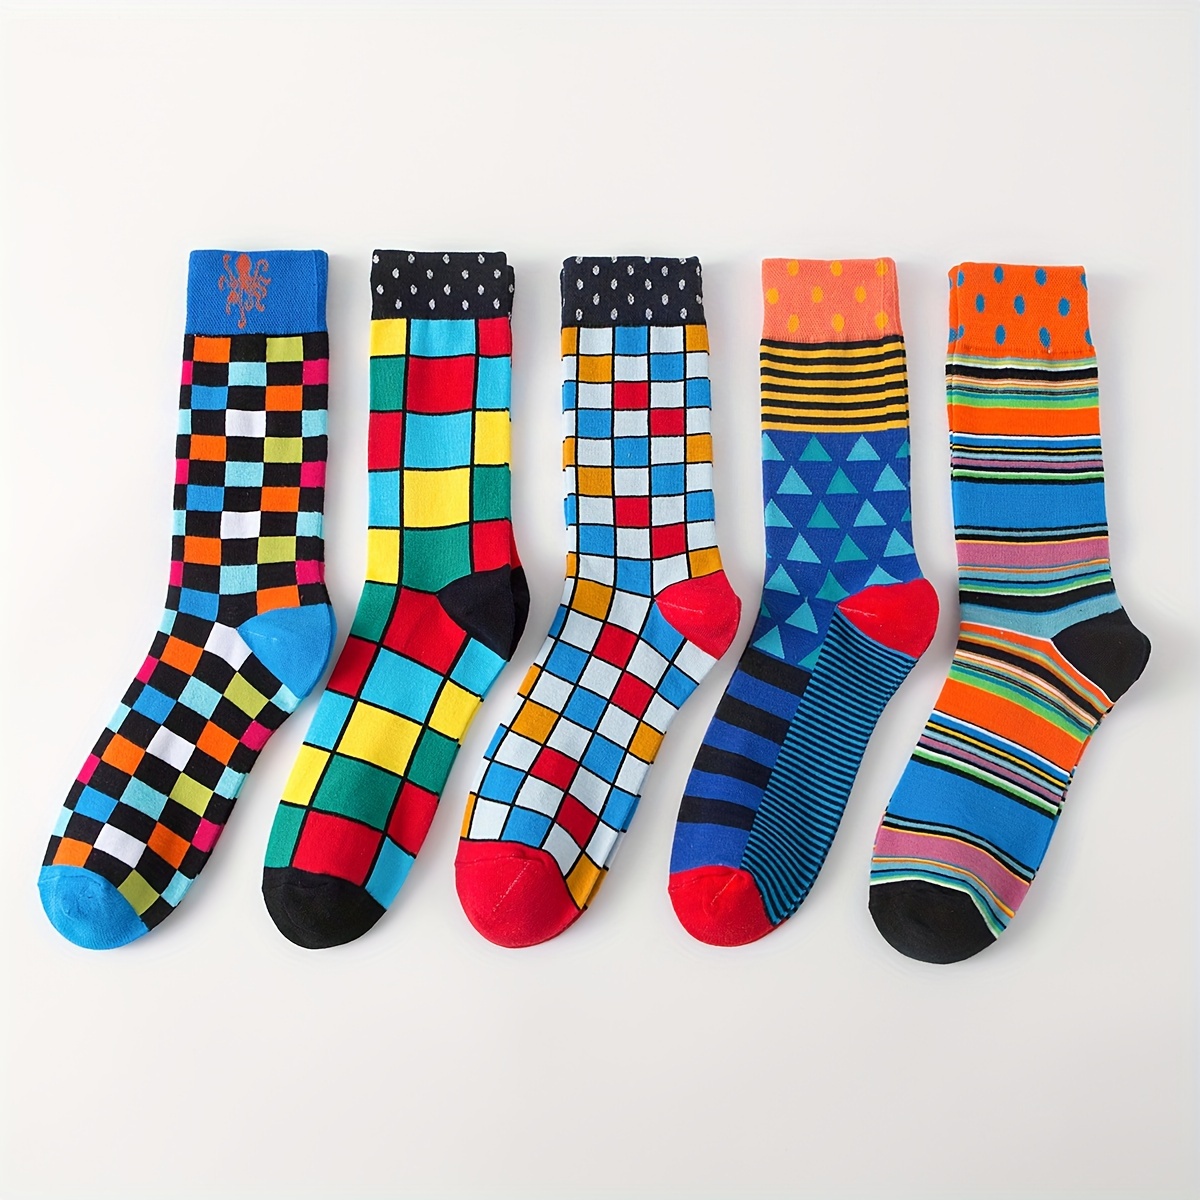 

5 Pairs Of Men's Trendy Colorful Geometric Pattern Crew Socks, Cotton Breathable Comfy Casual Unisex Socks For Men's Outdoor Wearing, All Seasons Wearing